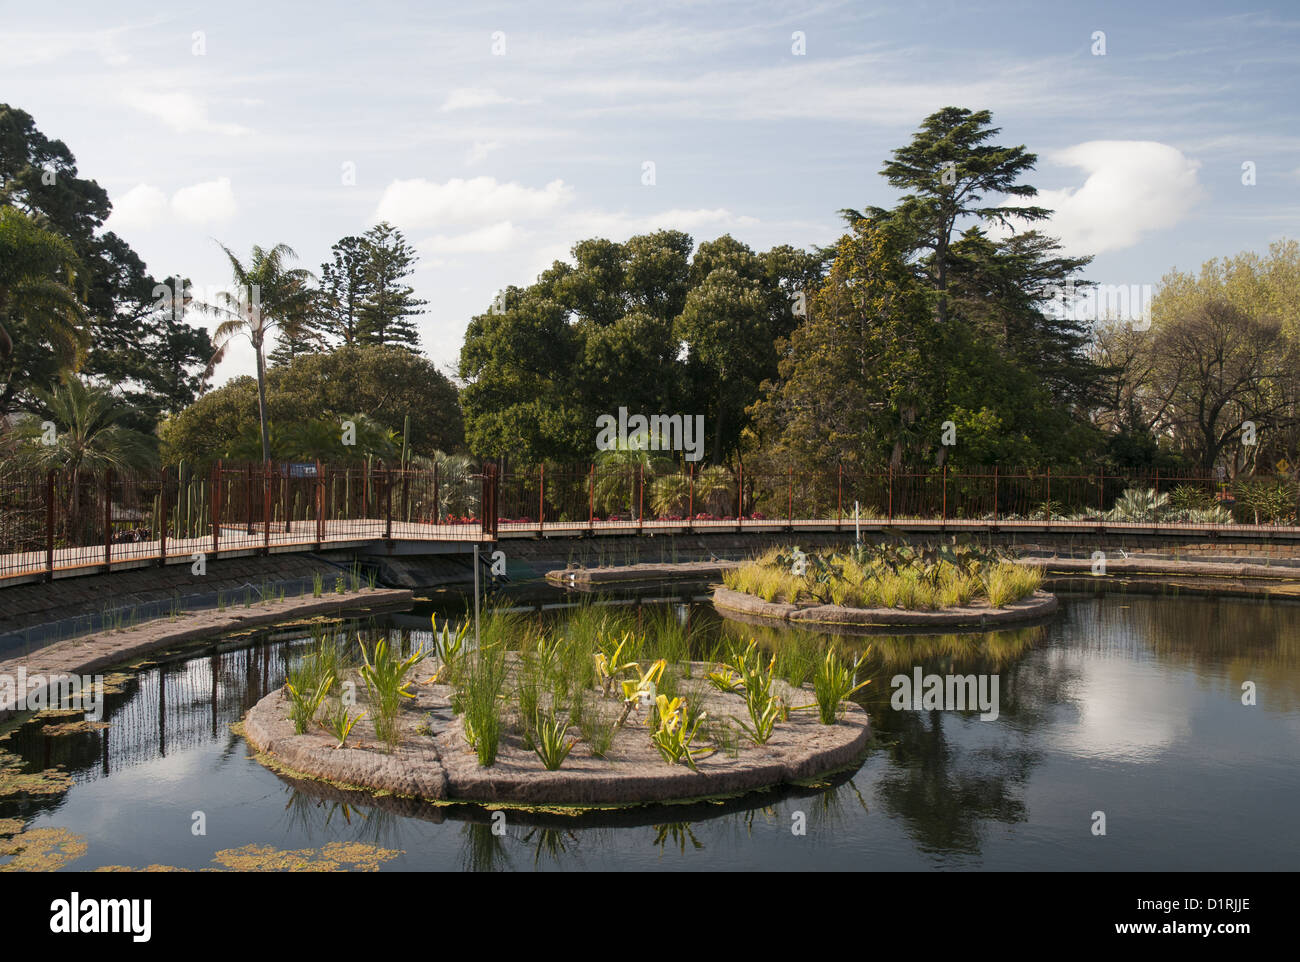 Pond formed within Guilfoyle's Volcano, a 19th-century  landscaped reservoir at the Royal Botanic Gardens, Melbourne Stock Photo